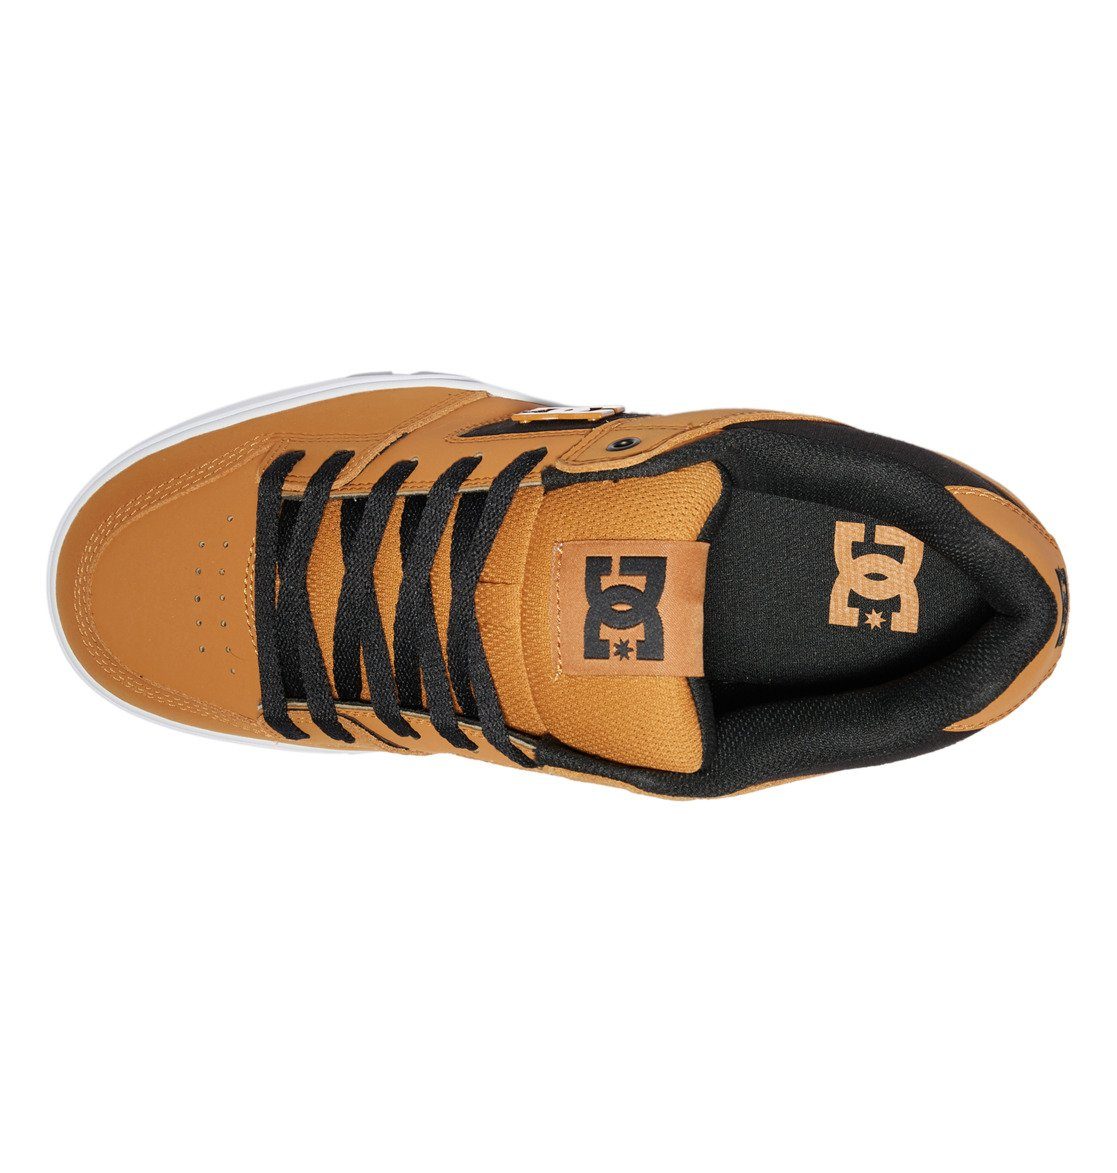 DC Pure Sneaker Dk Choco/Black/Oyster Shoes